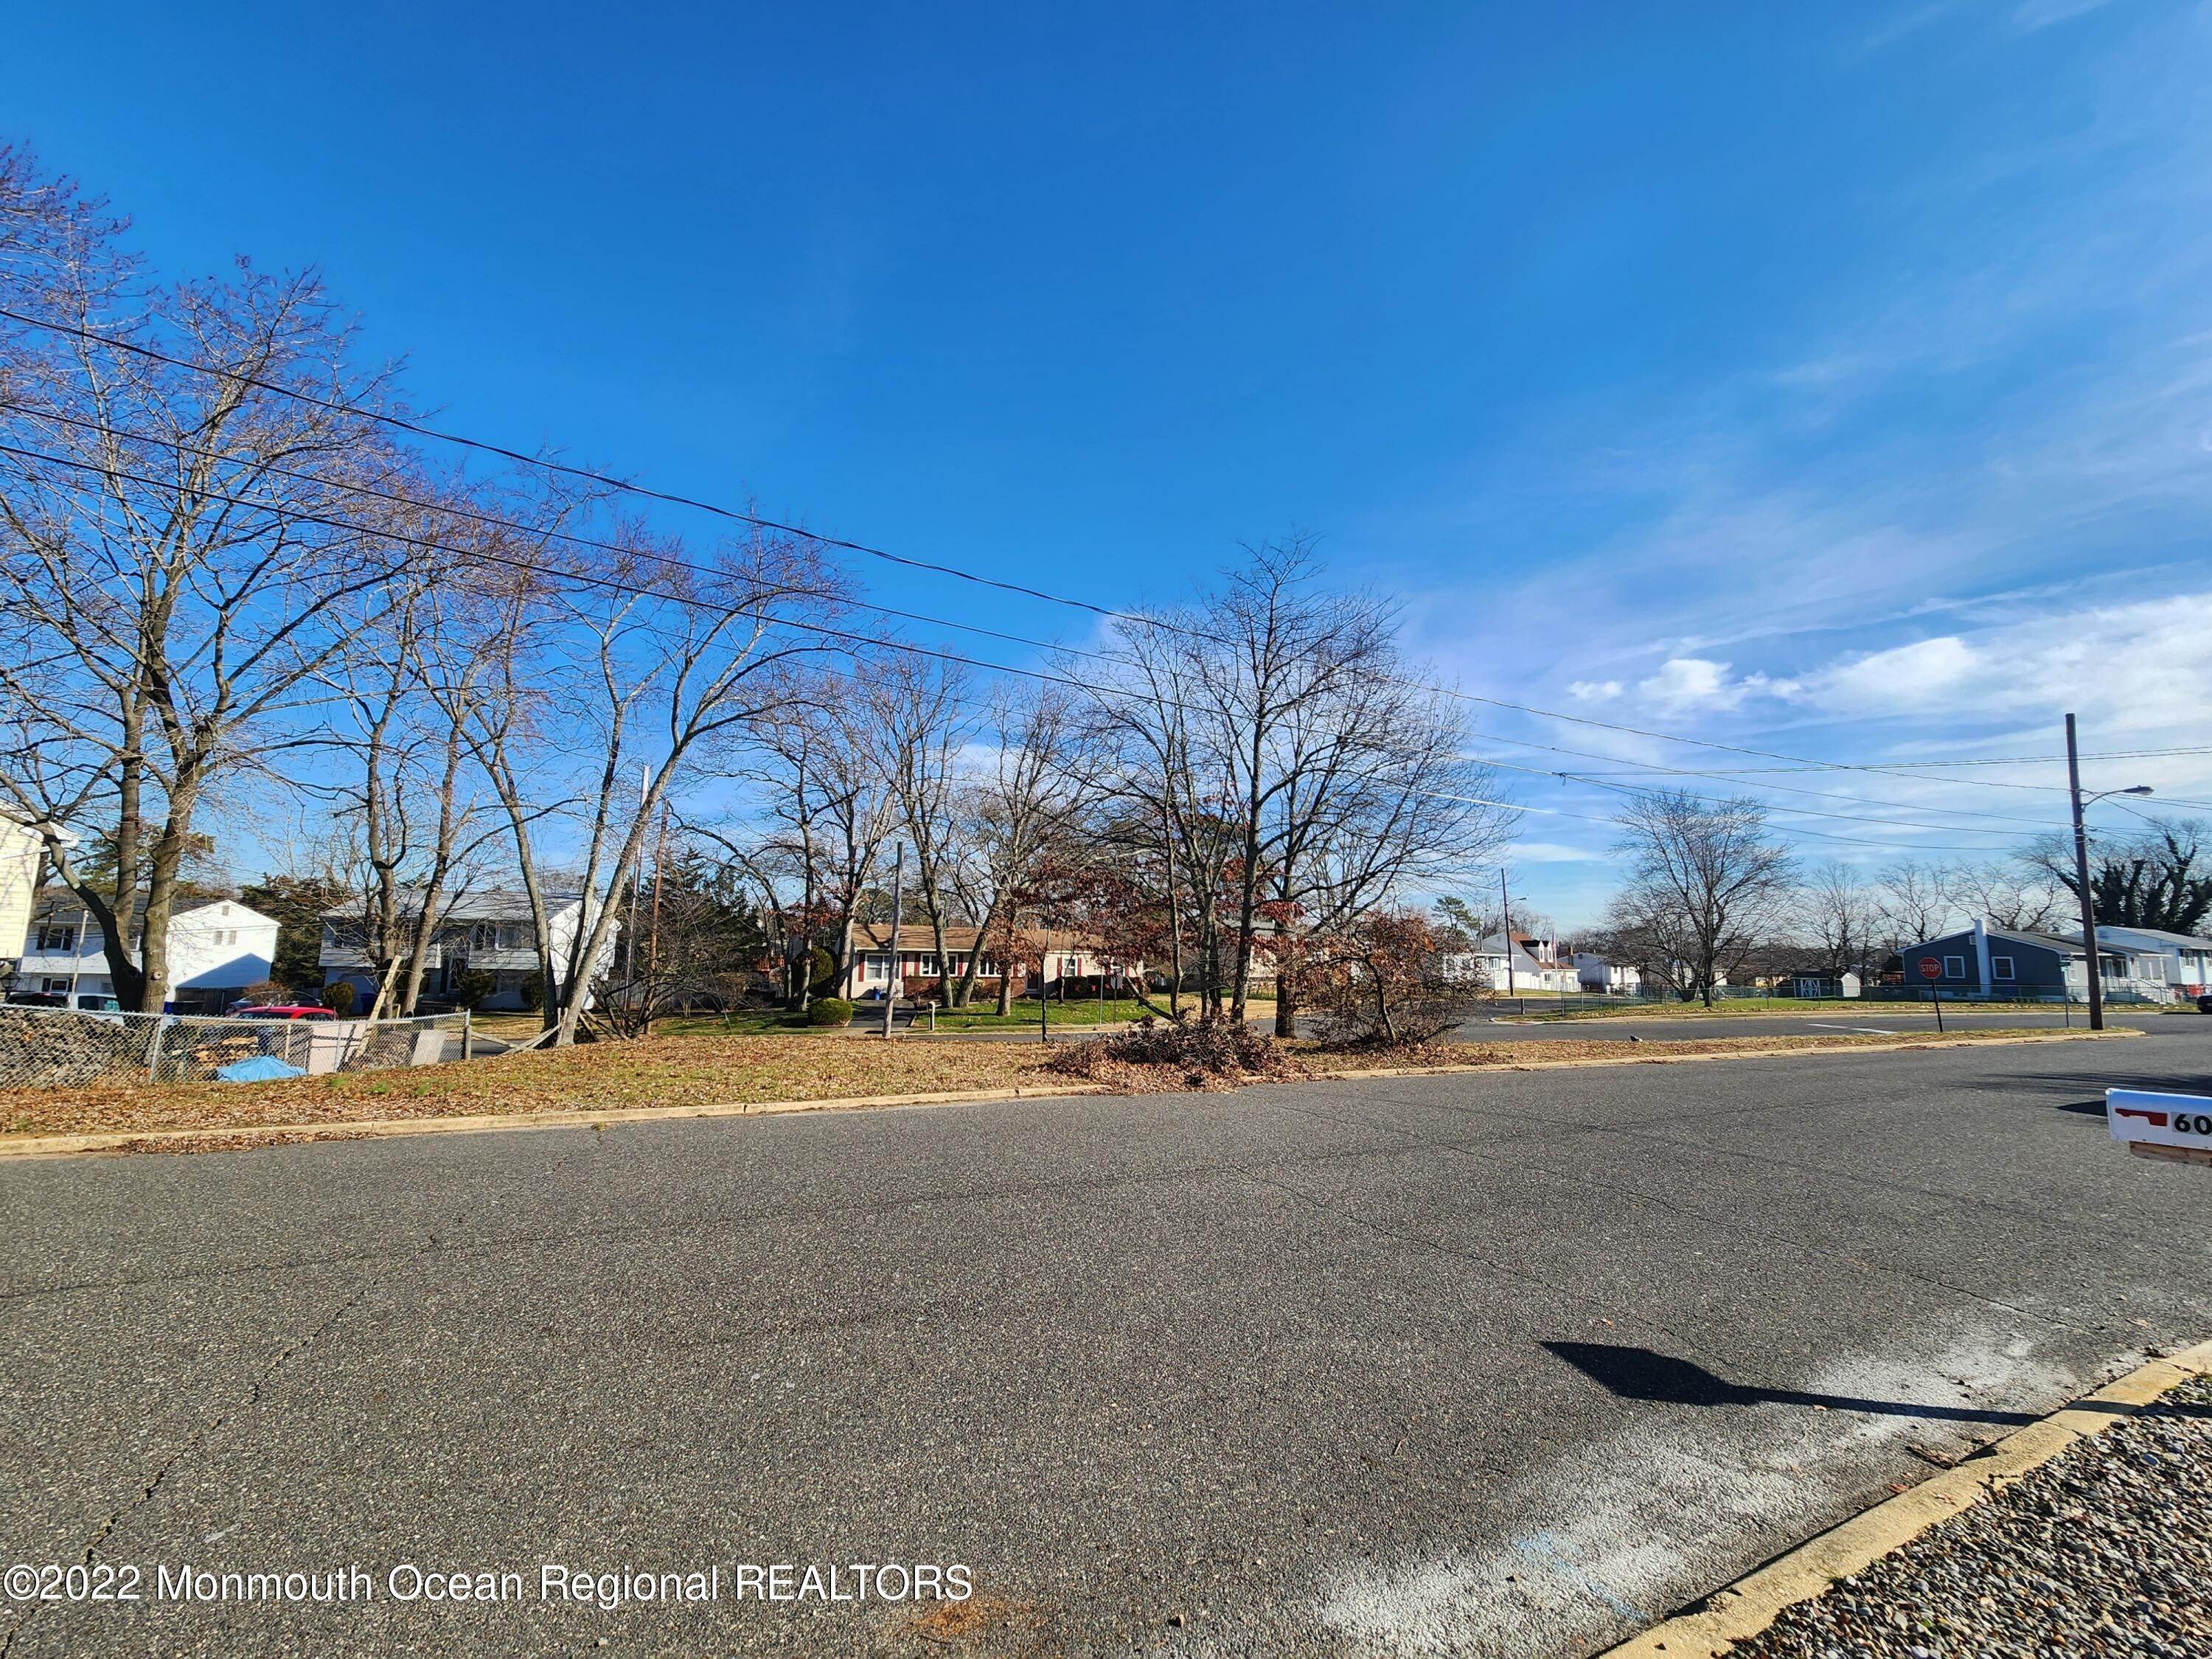 Property for Sale at Pennsylvania Avenue Brick, New Jersey 08724 United States